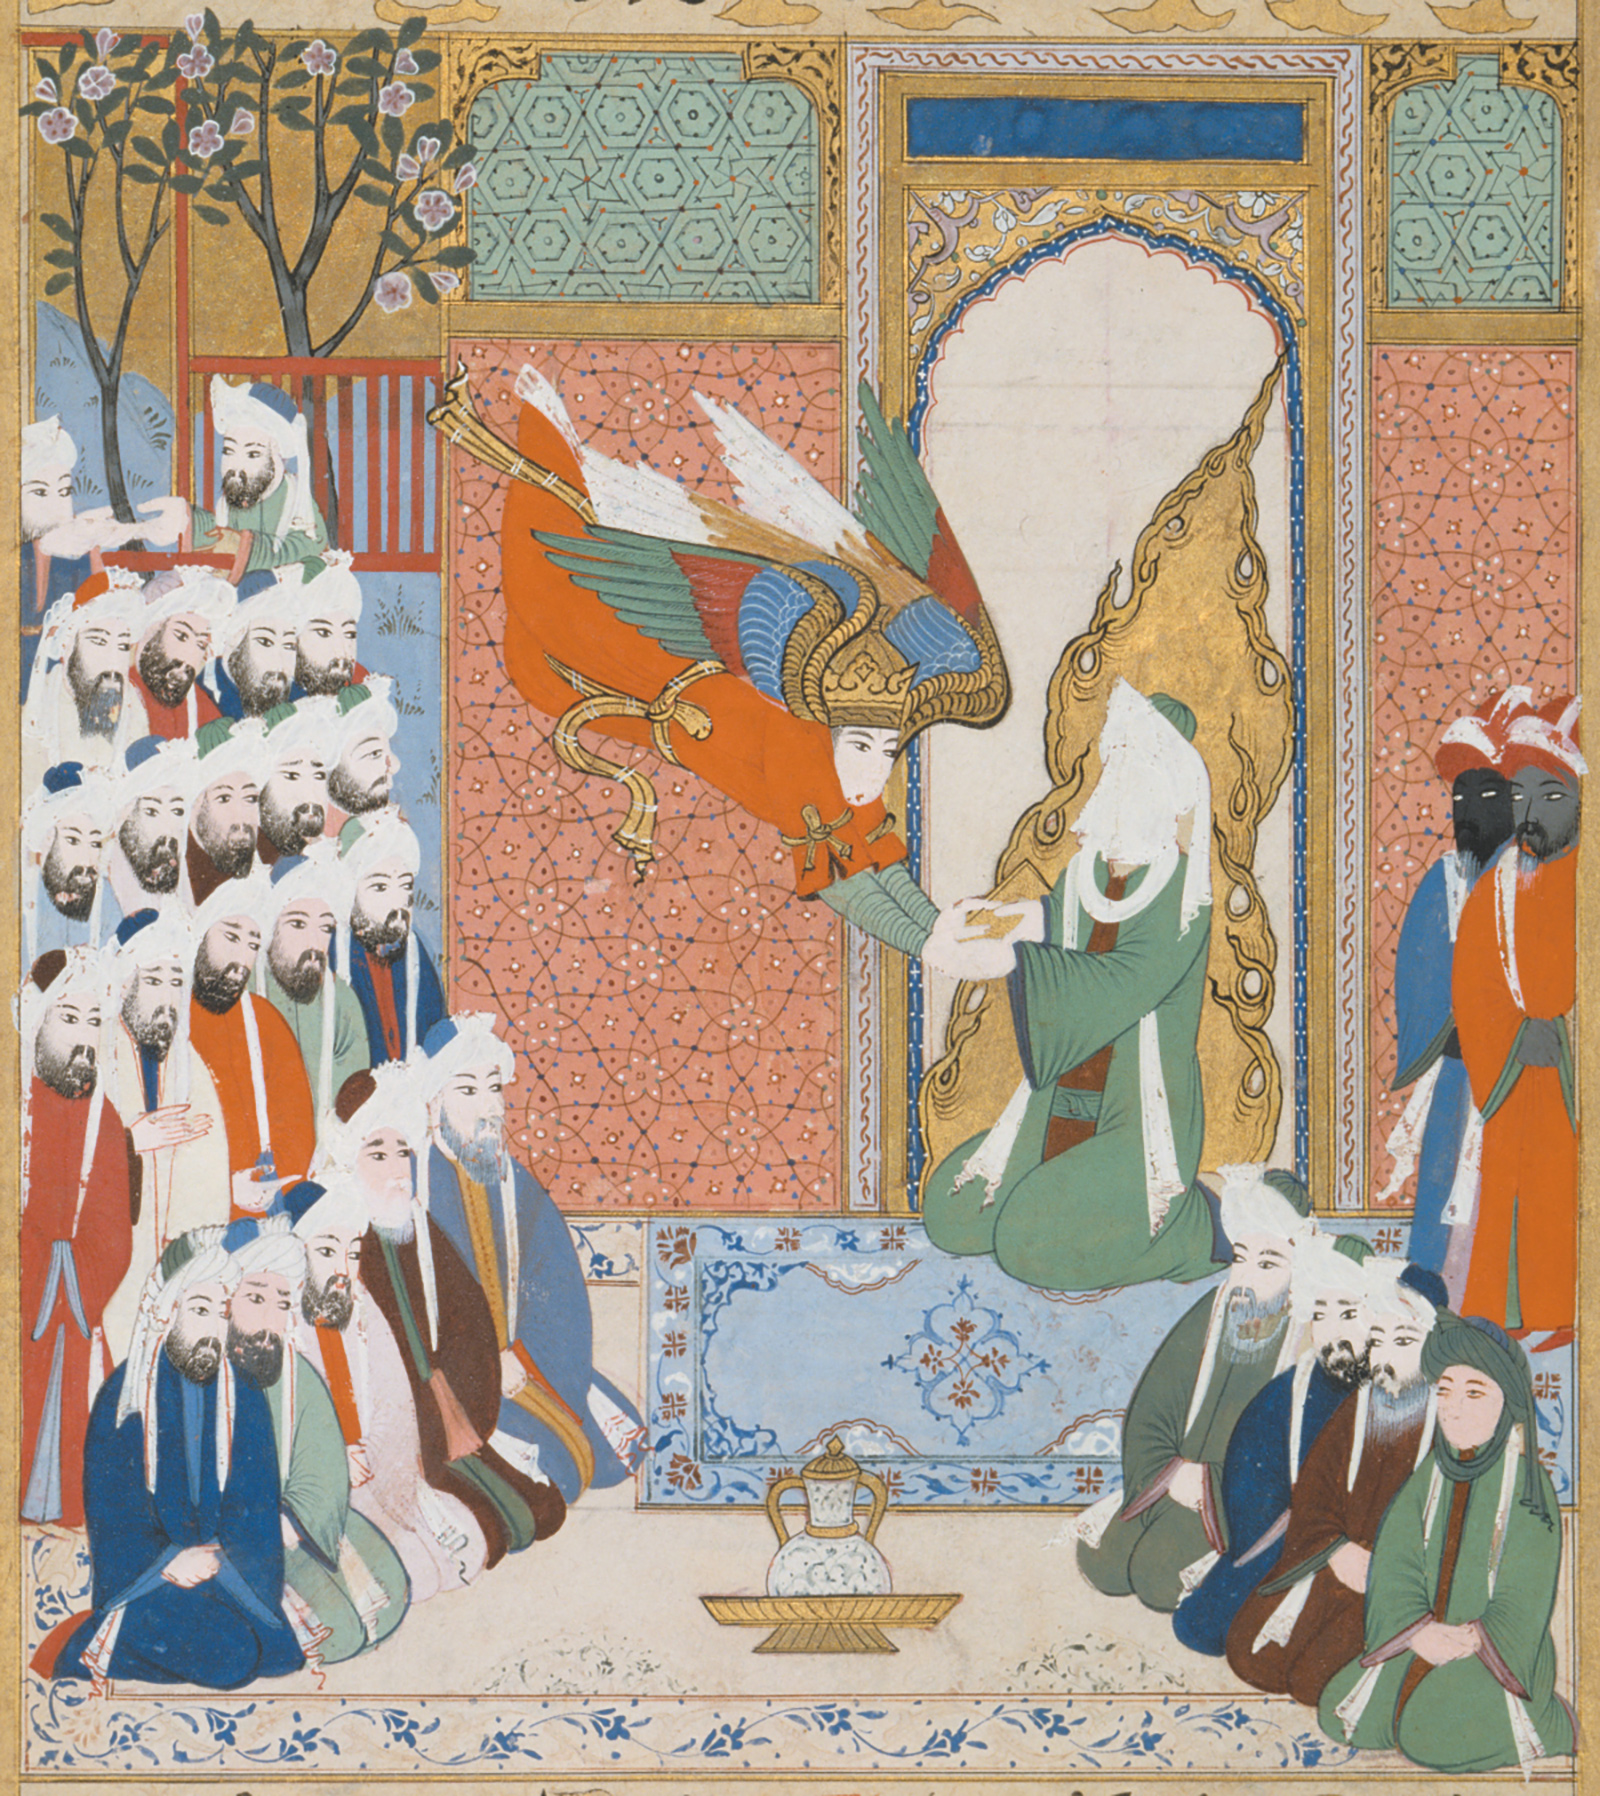 ‘The angel Gabriel revealing the eighth sura of the Koran to Muhammad’; illustration from the Siyar-i Nabi (Life of the Prophet), commissioned by the Ottoman sultan Murad III, 1594–1595